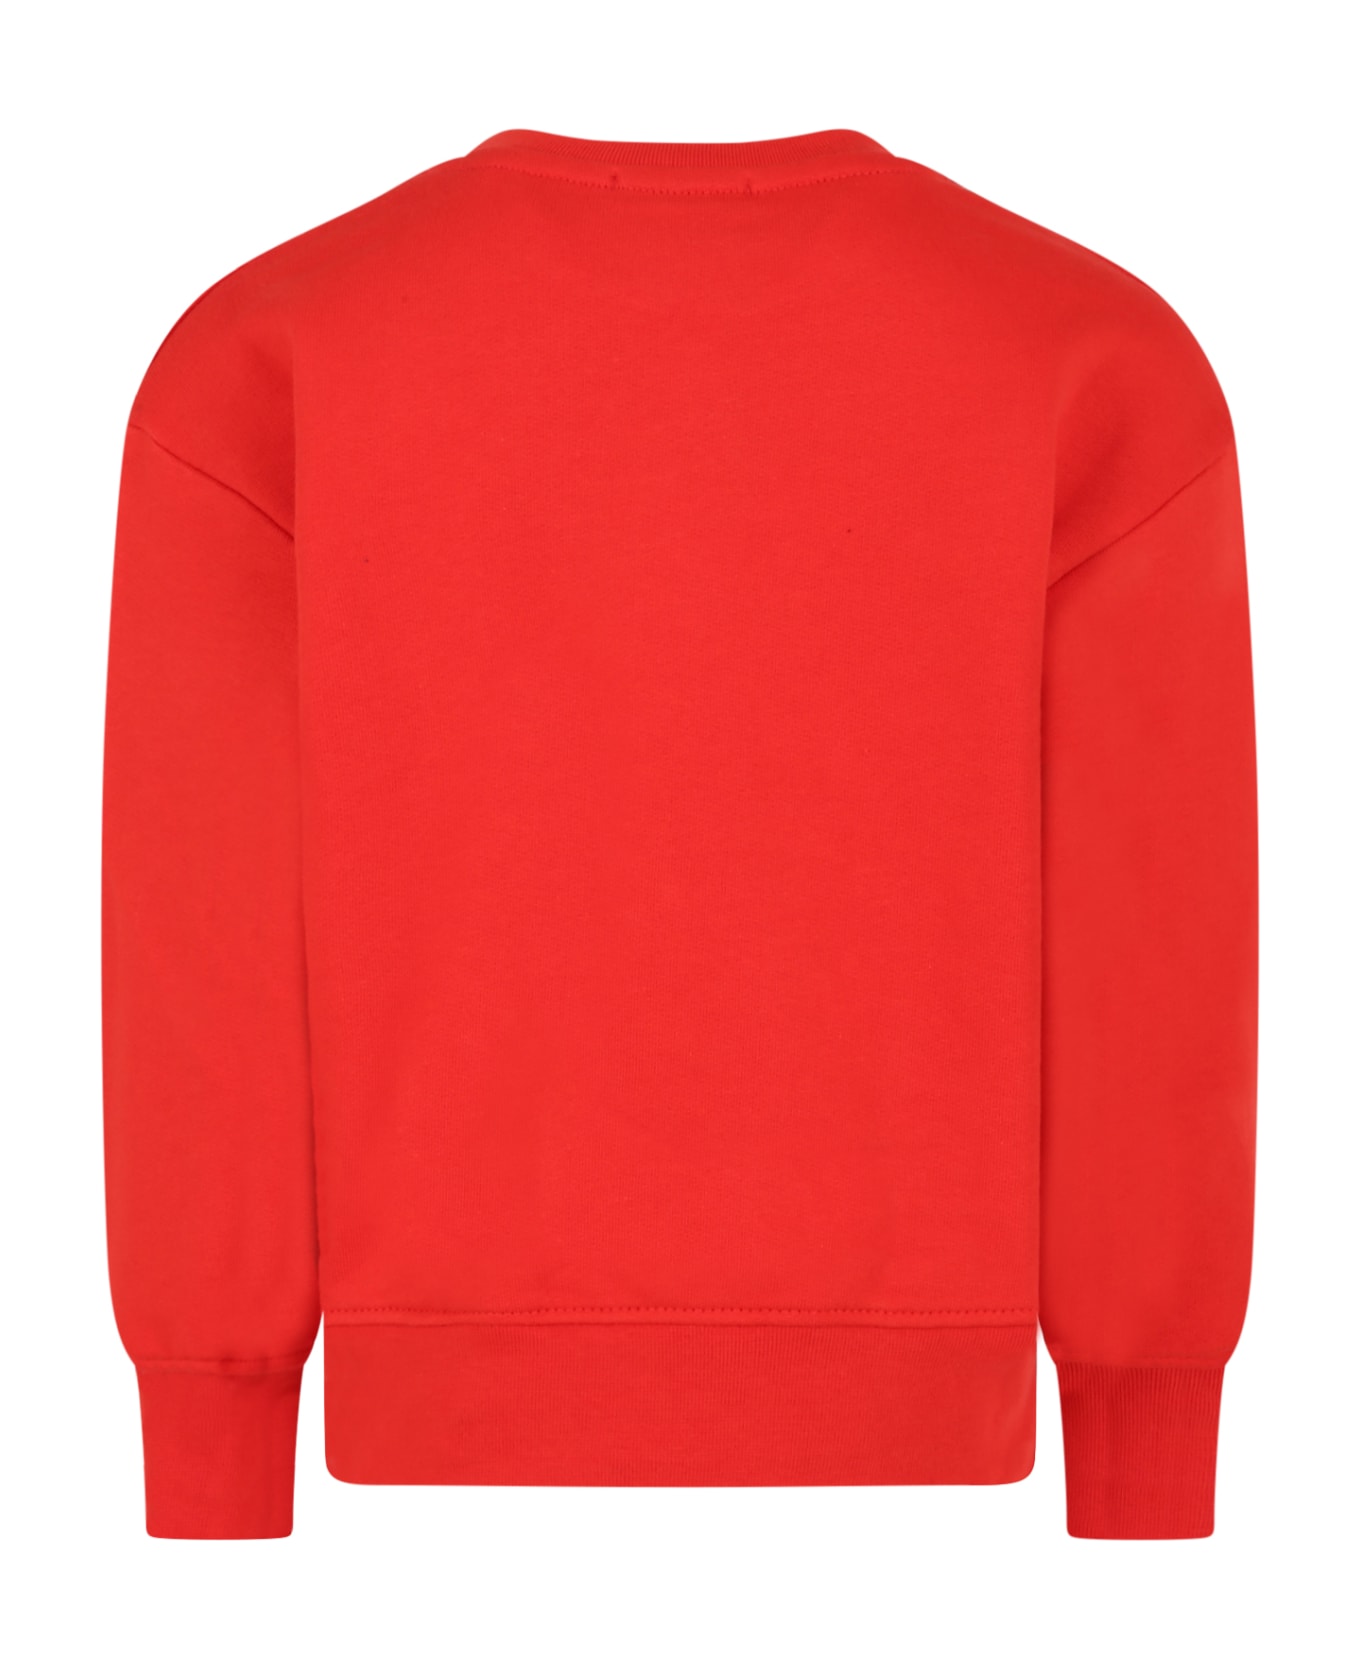 MSGM Red Sweatshirt For Kids With White Logo - Red